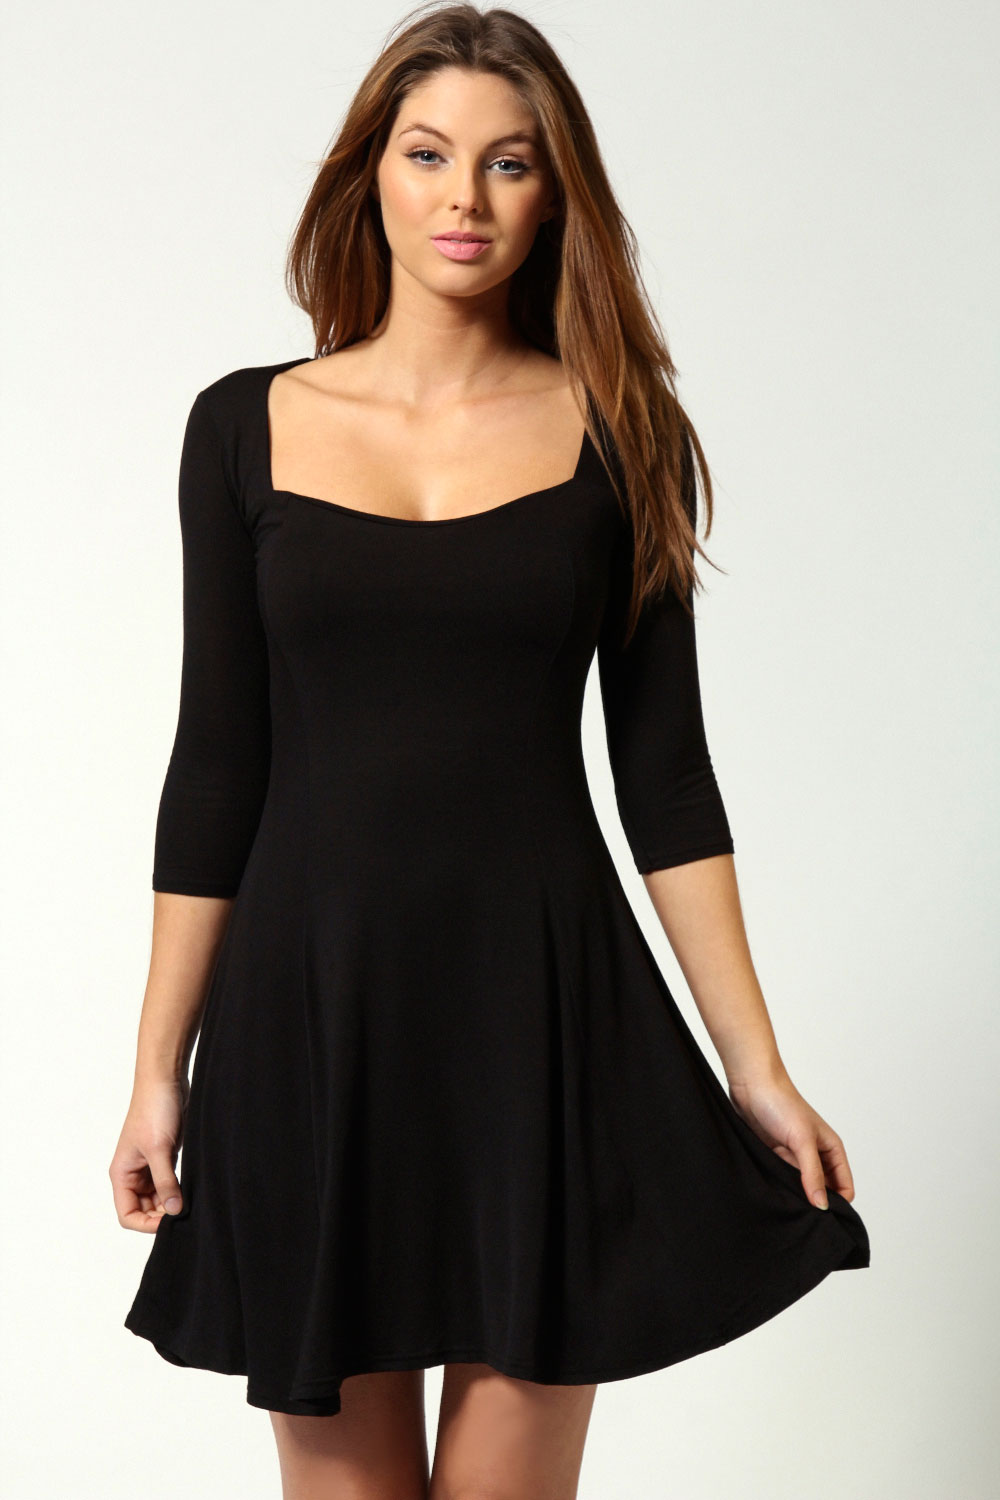 Black Skater Dress Picture Collection